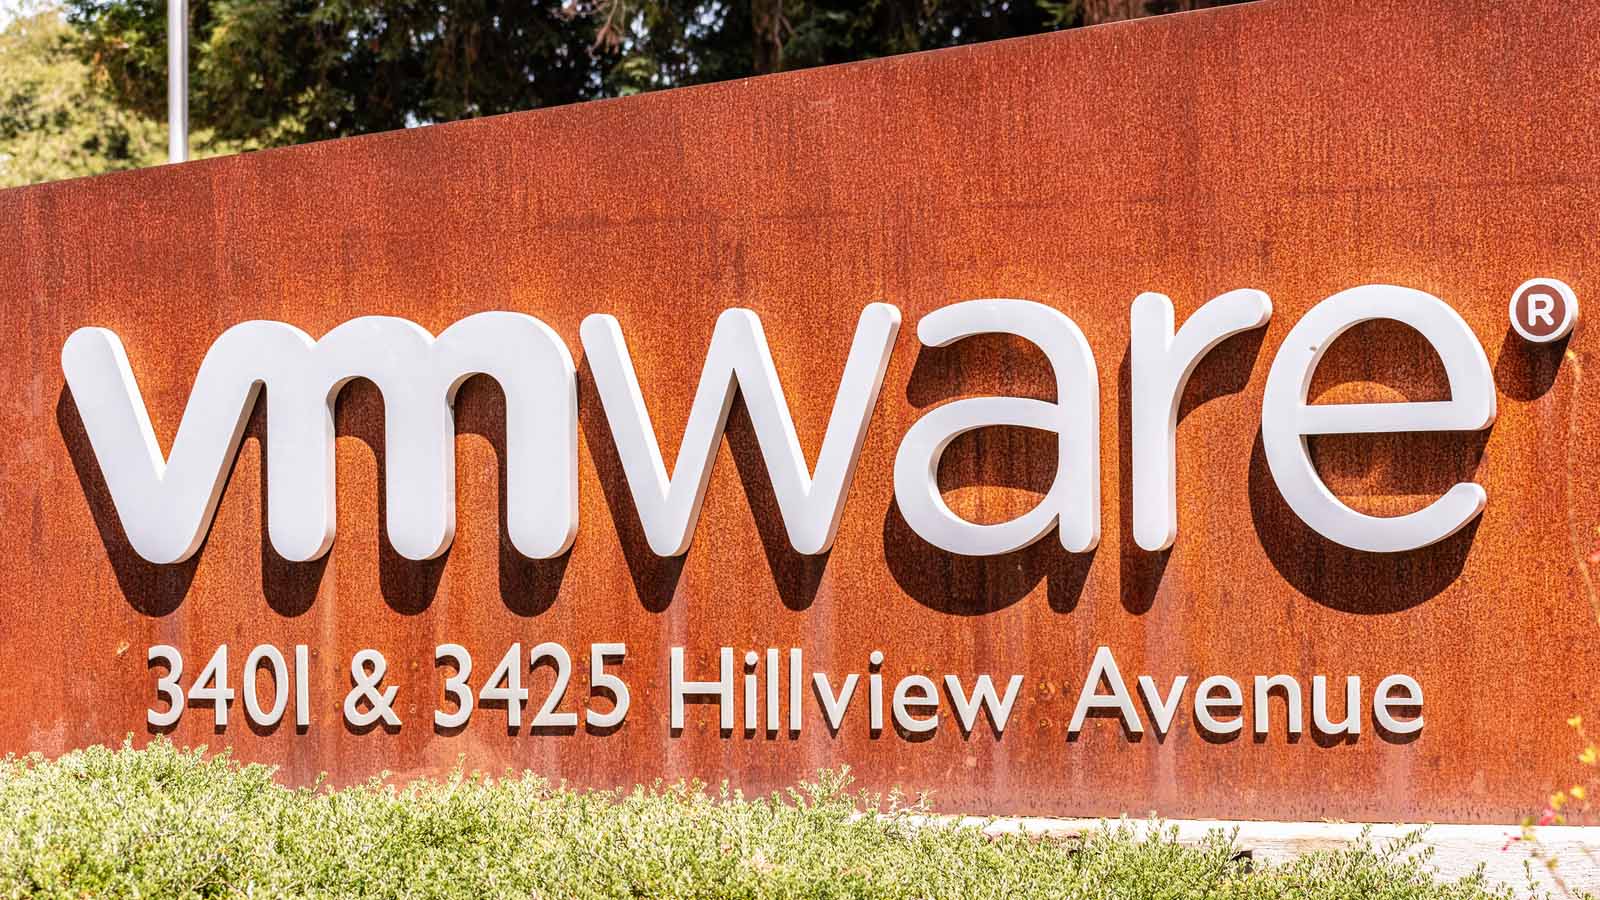 The VMWare logo outside of an office building